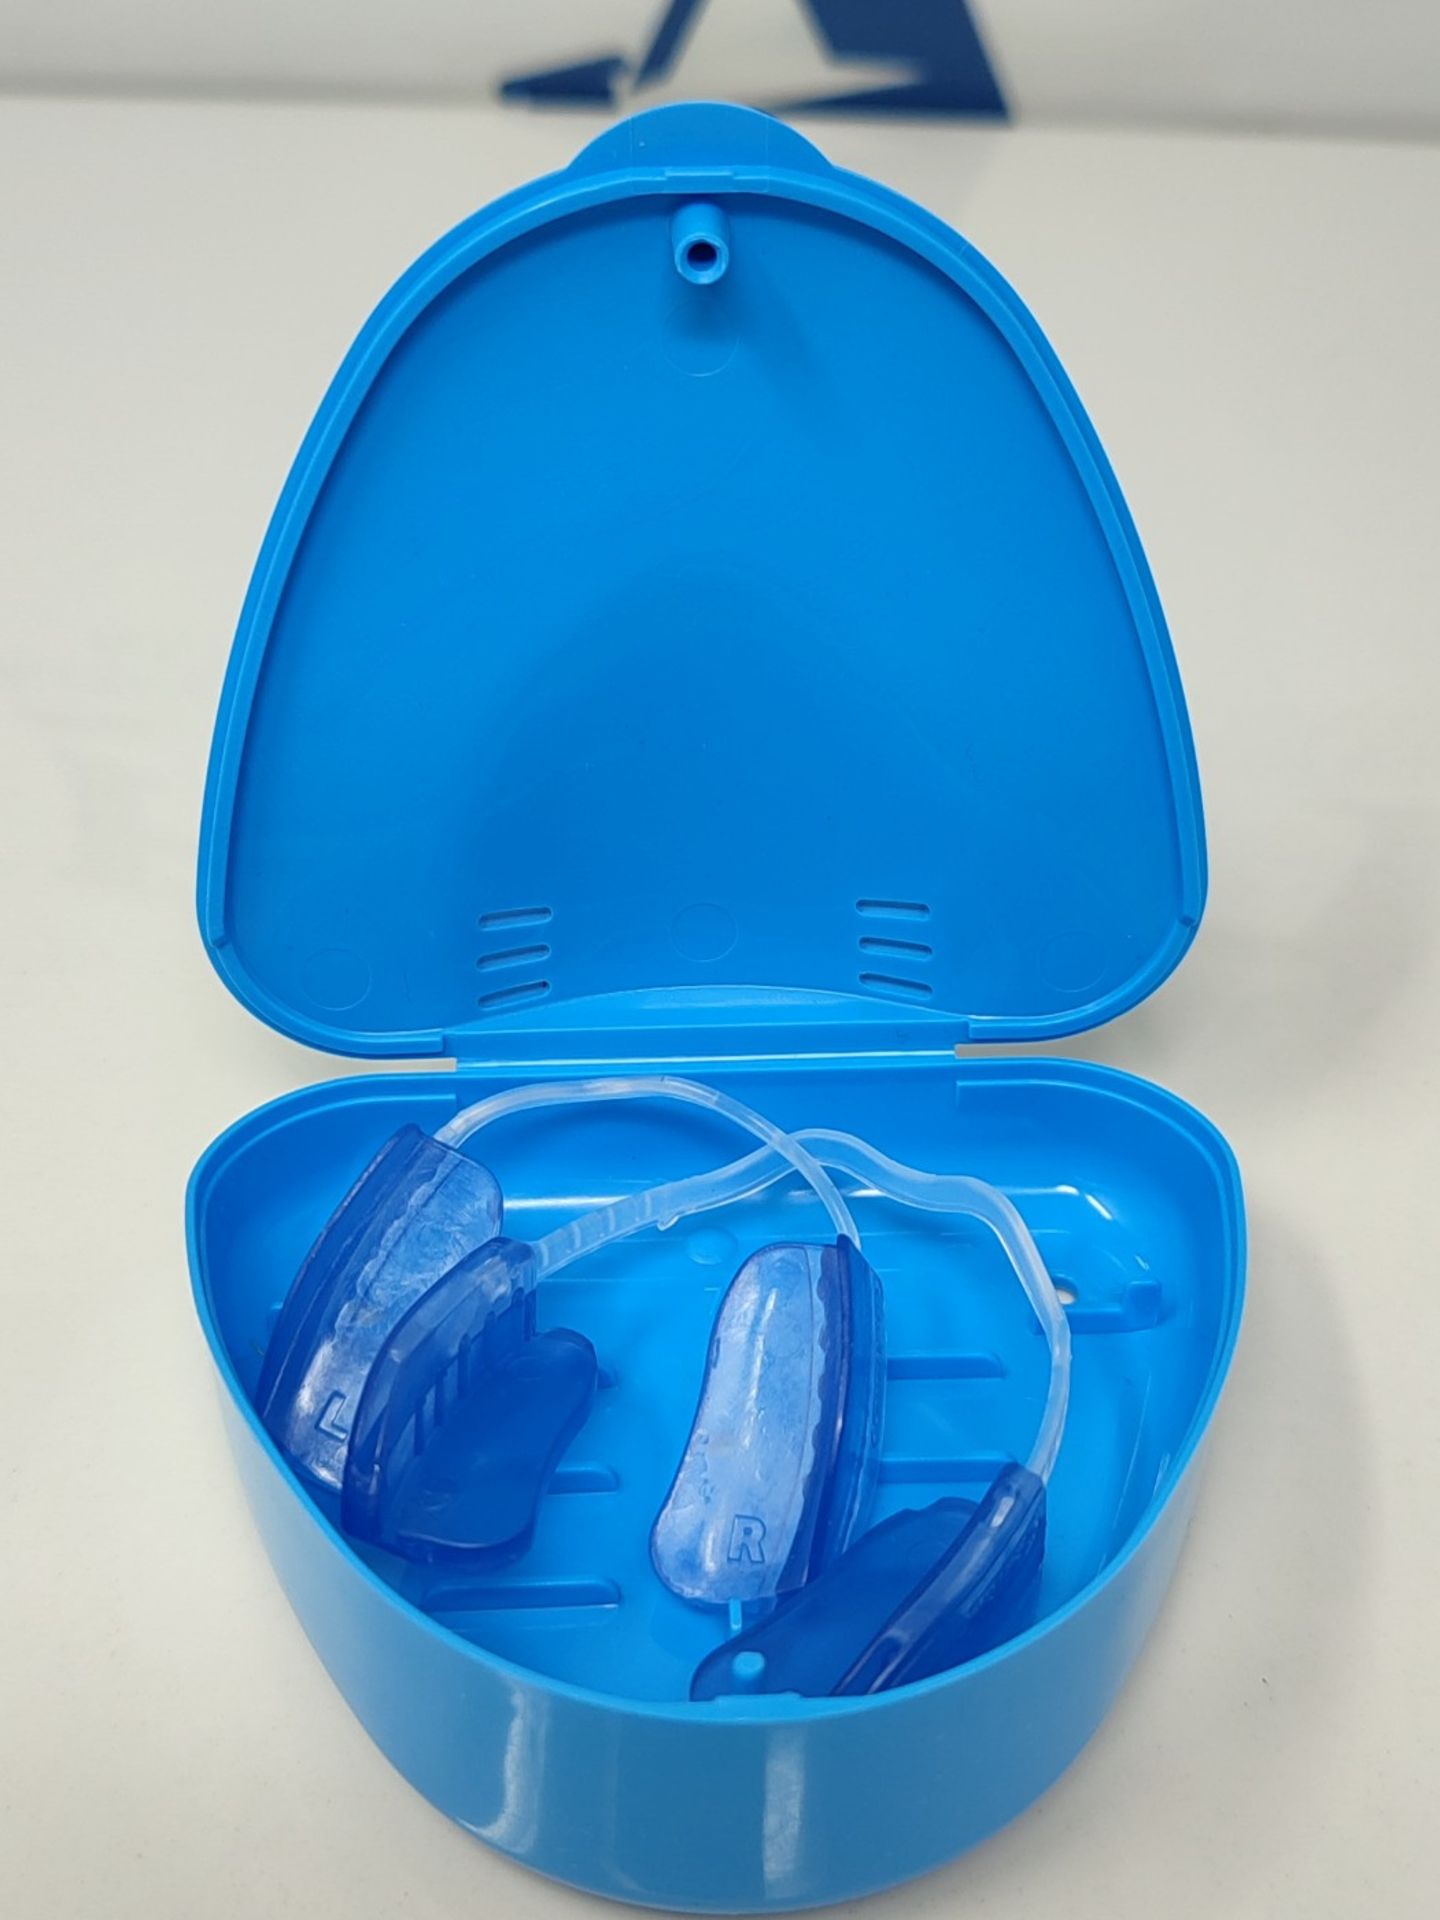 DenTek Comfort-Fit Dental Mouth Guards to Help Prevent Night Time Teeth Grinding and C - Image 2 of 3